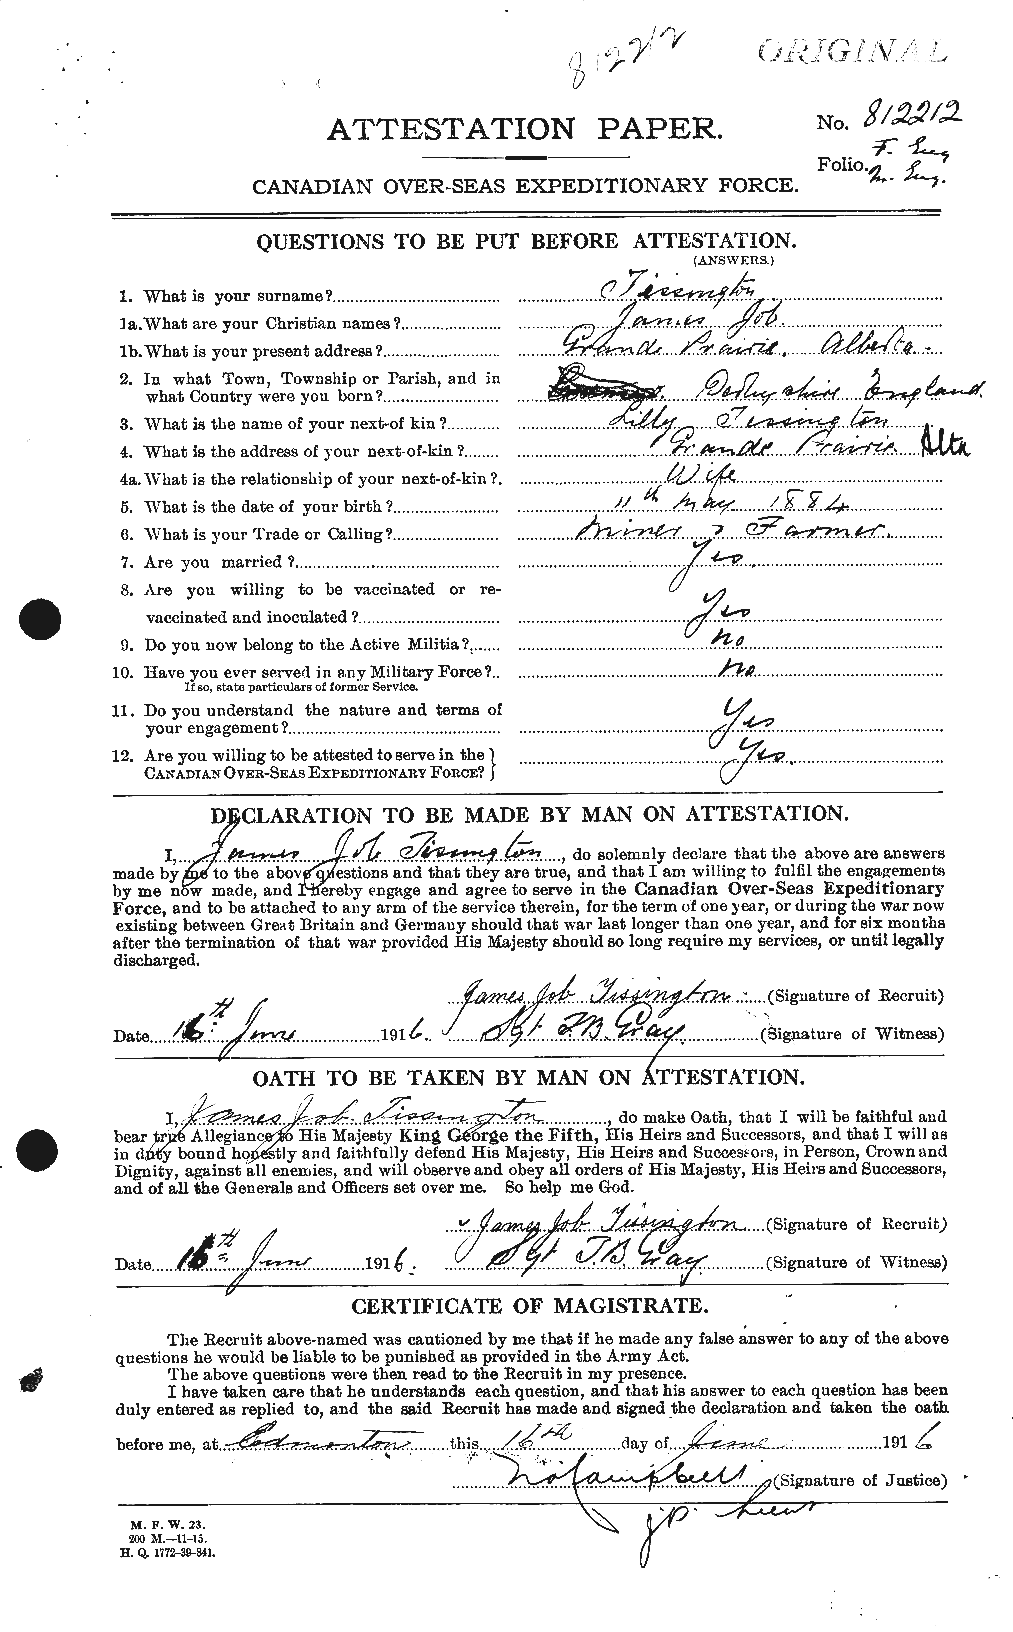 Personnel Records of the First World War - CEF 634864a